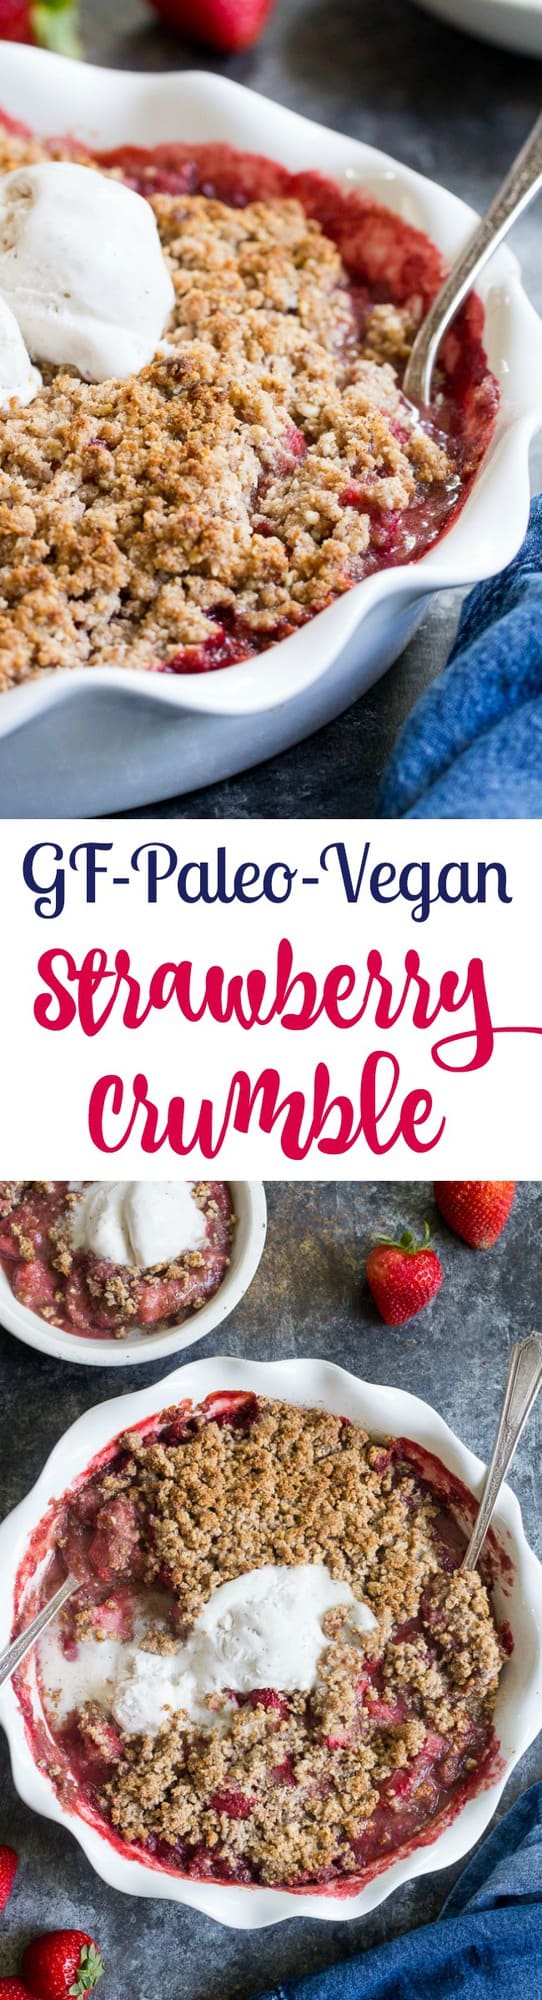 This paleo & vegan strawberry crumble couldn't be easier or more delicious! Made without refined sugar, grains, or dairy, it's a healthy summer dessert that will make everyone happy. A big scoop of coconut vanilla ice cream makes it the perfect treat! Gluten-free, dairy-free, paleo and vegan.